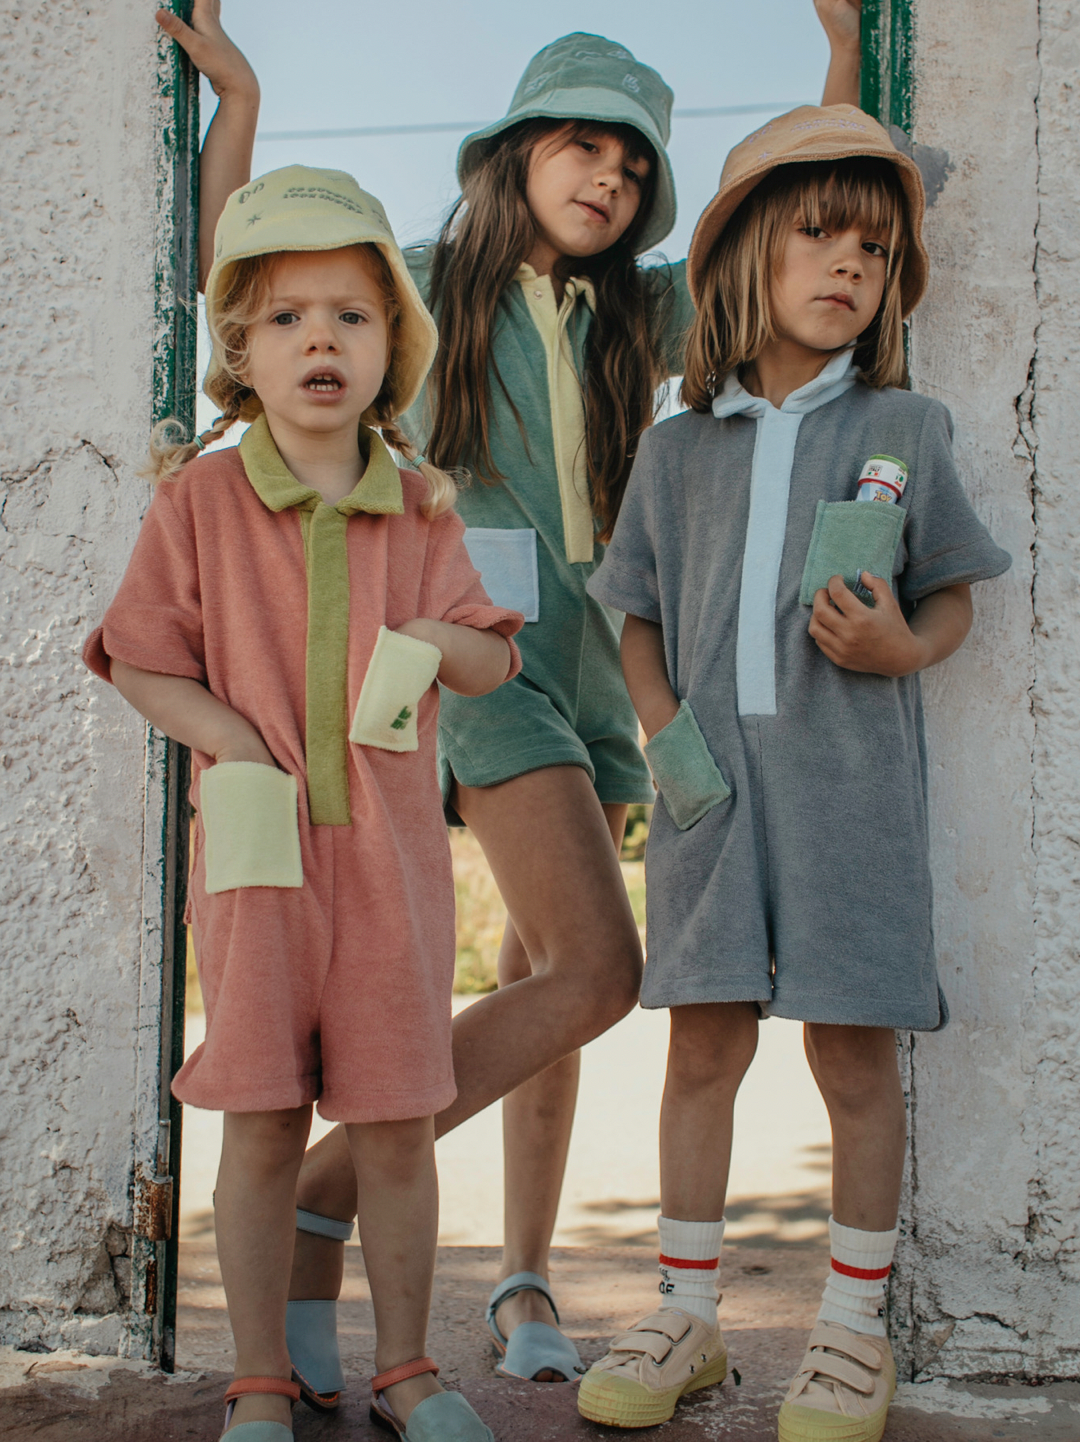 Stone | Three children wearing kids' jumpsuits in different colors: one peach with green collar and placket, one green with yellow collar and placket, one pale gray with blue collar and placket